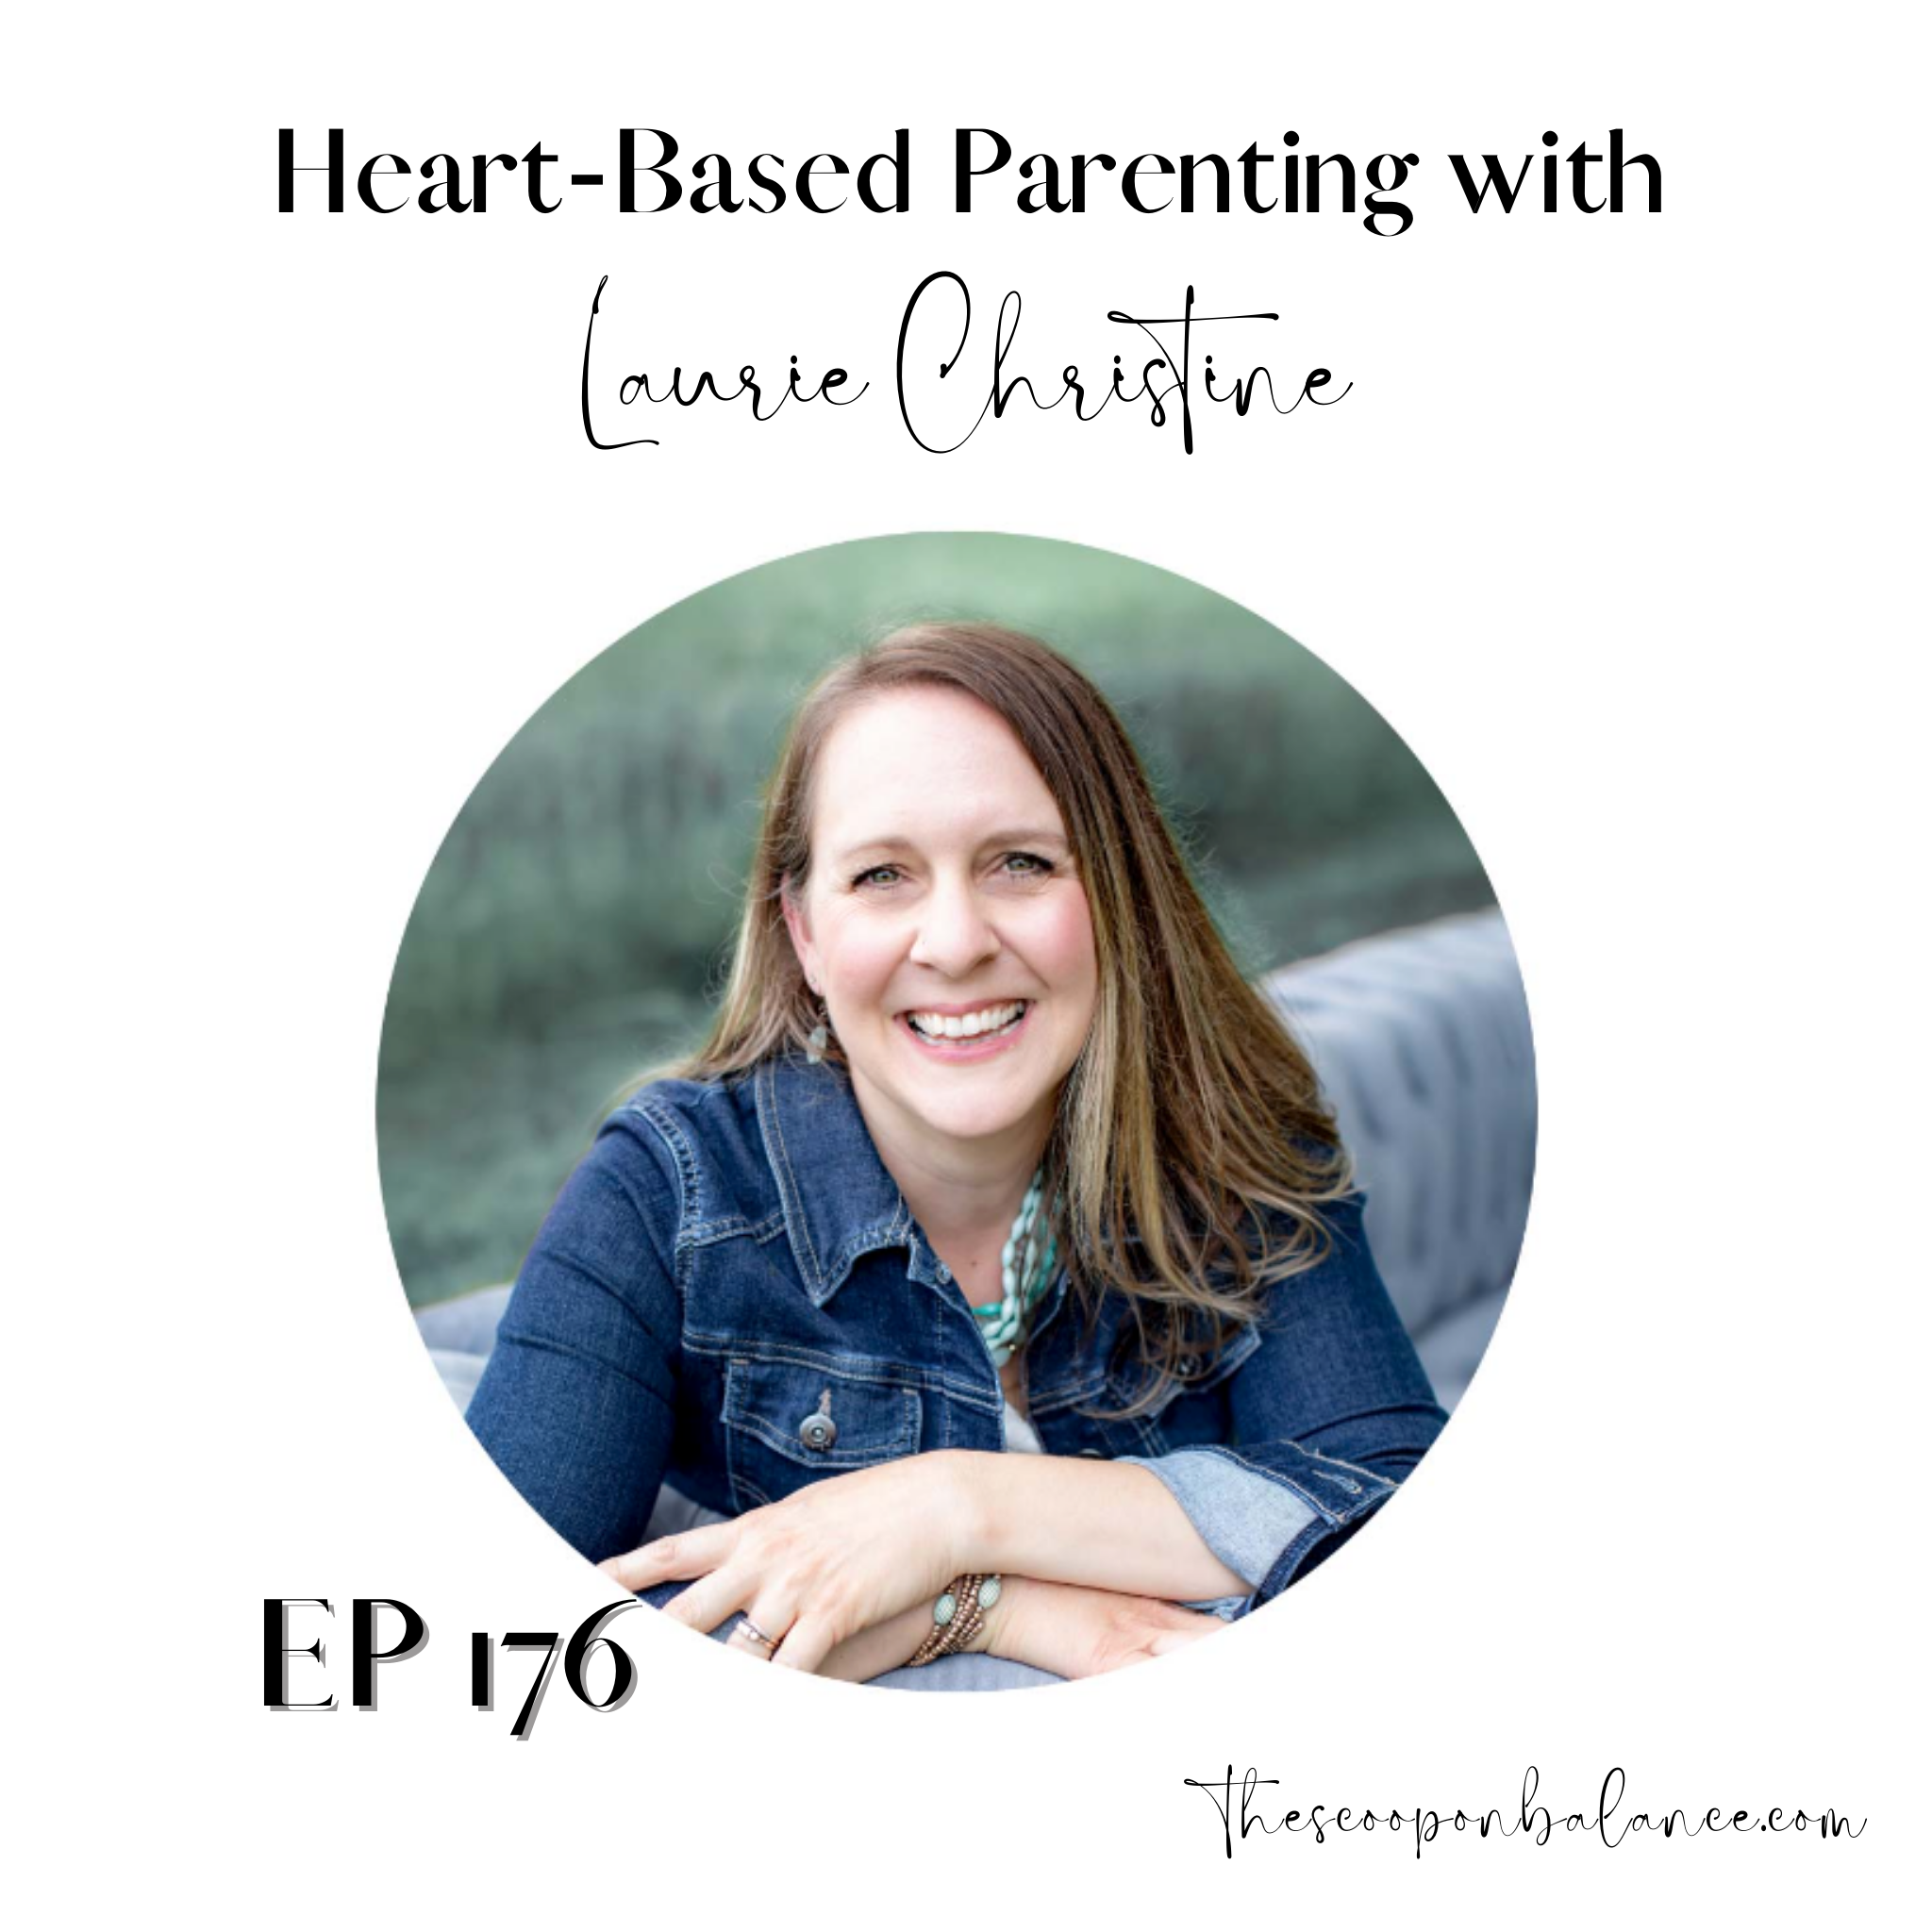 Ep 176: Heart-Based Parenting with Laurie Christine